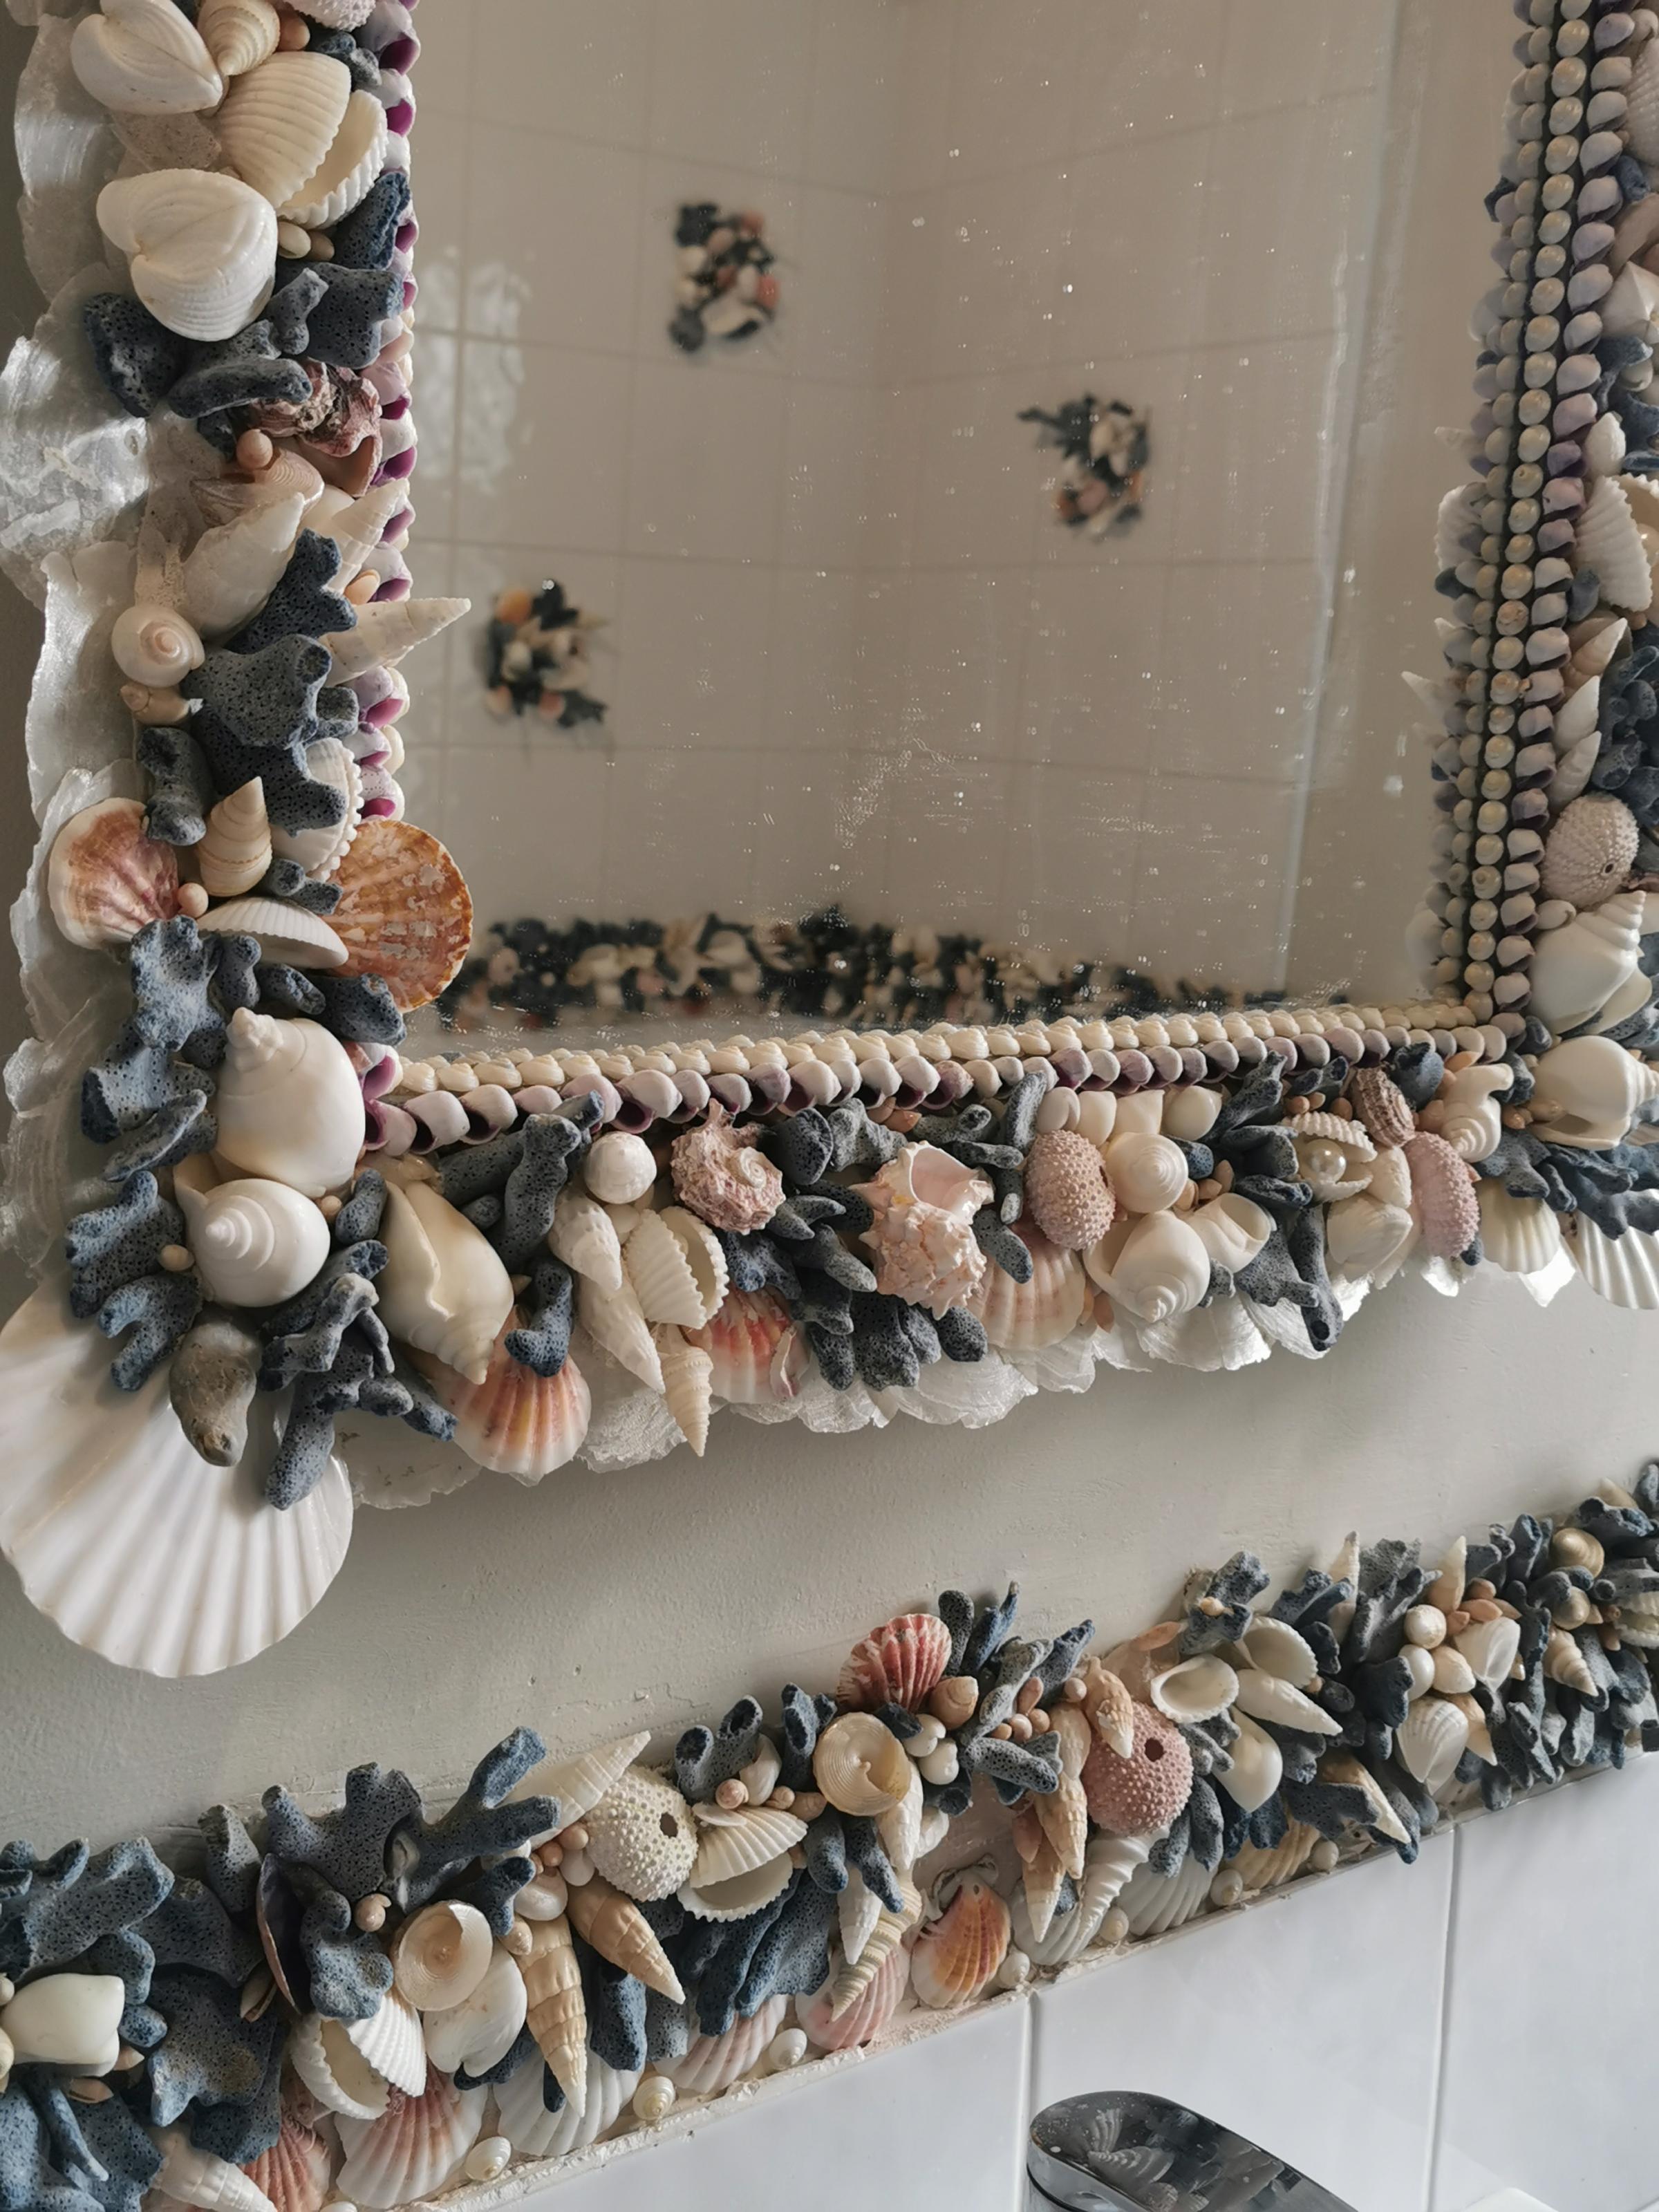 Blue coral bathroom feauting scallops, pink urchins, white conch shells and lots of vintage blue coral.